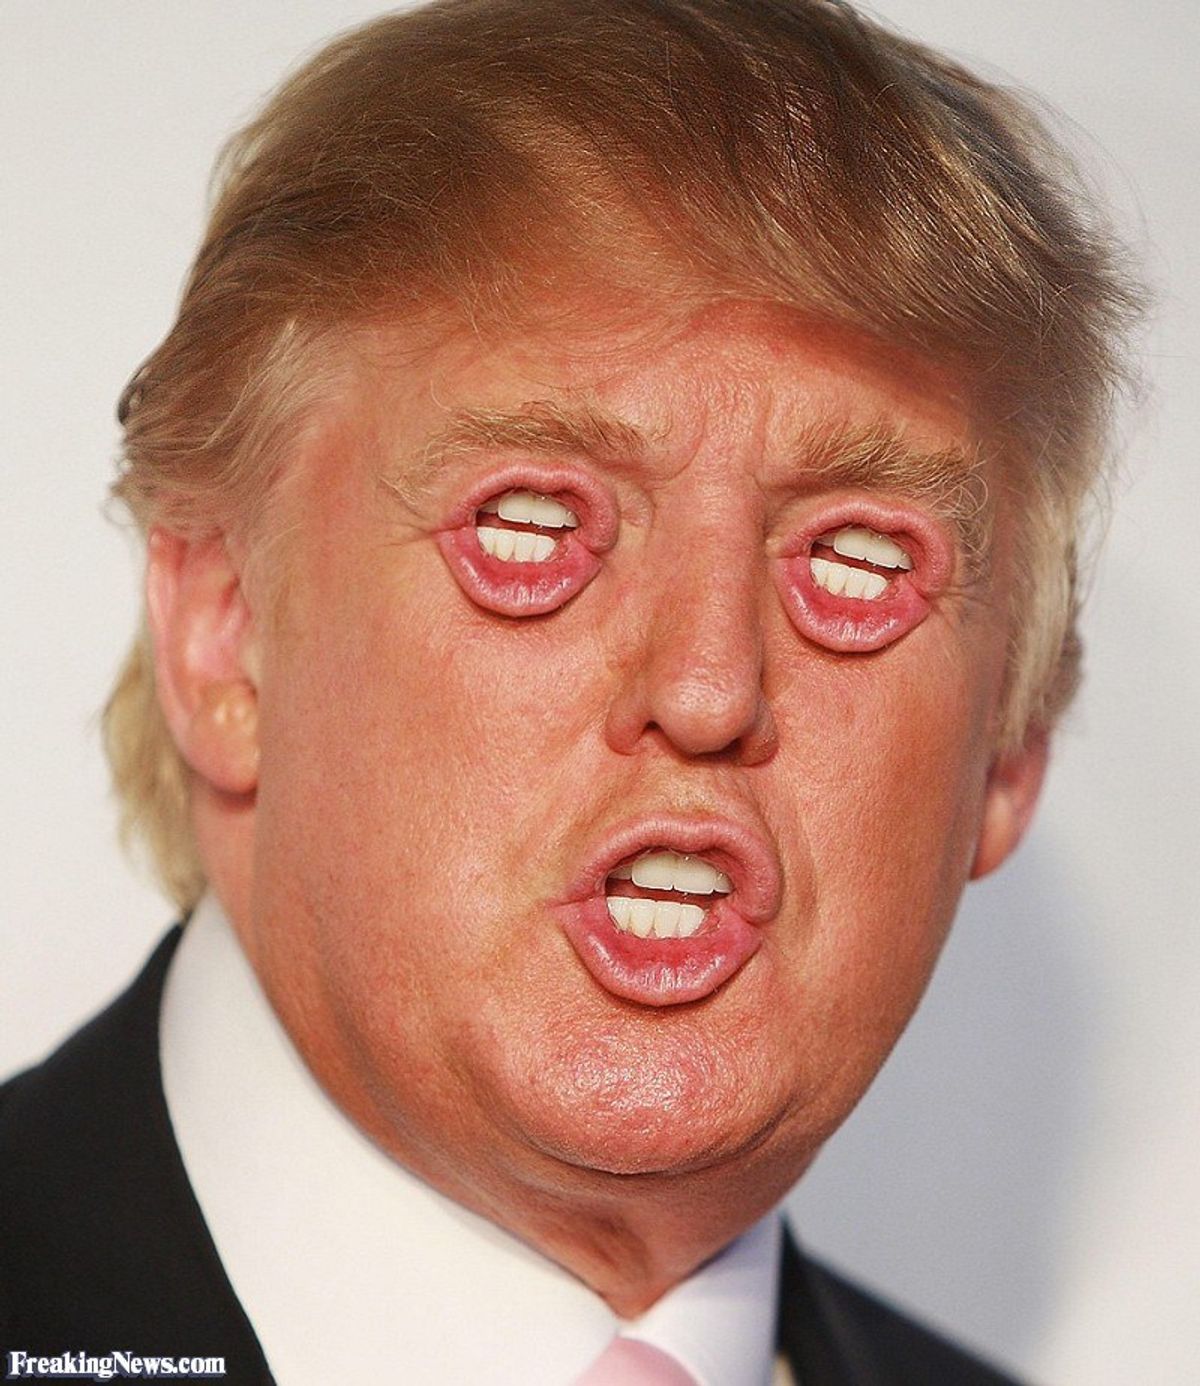 Top 5 Best Photoshoped Pictures Of Donald Trump